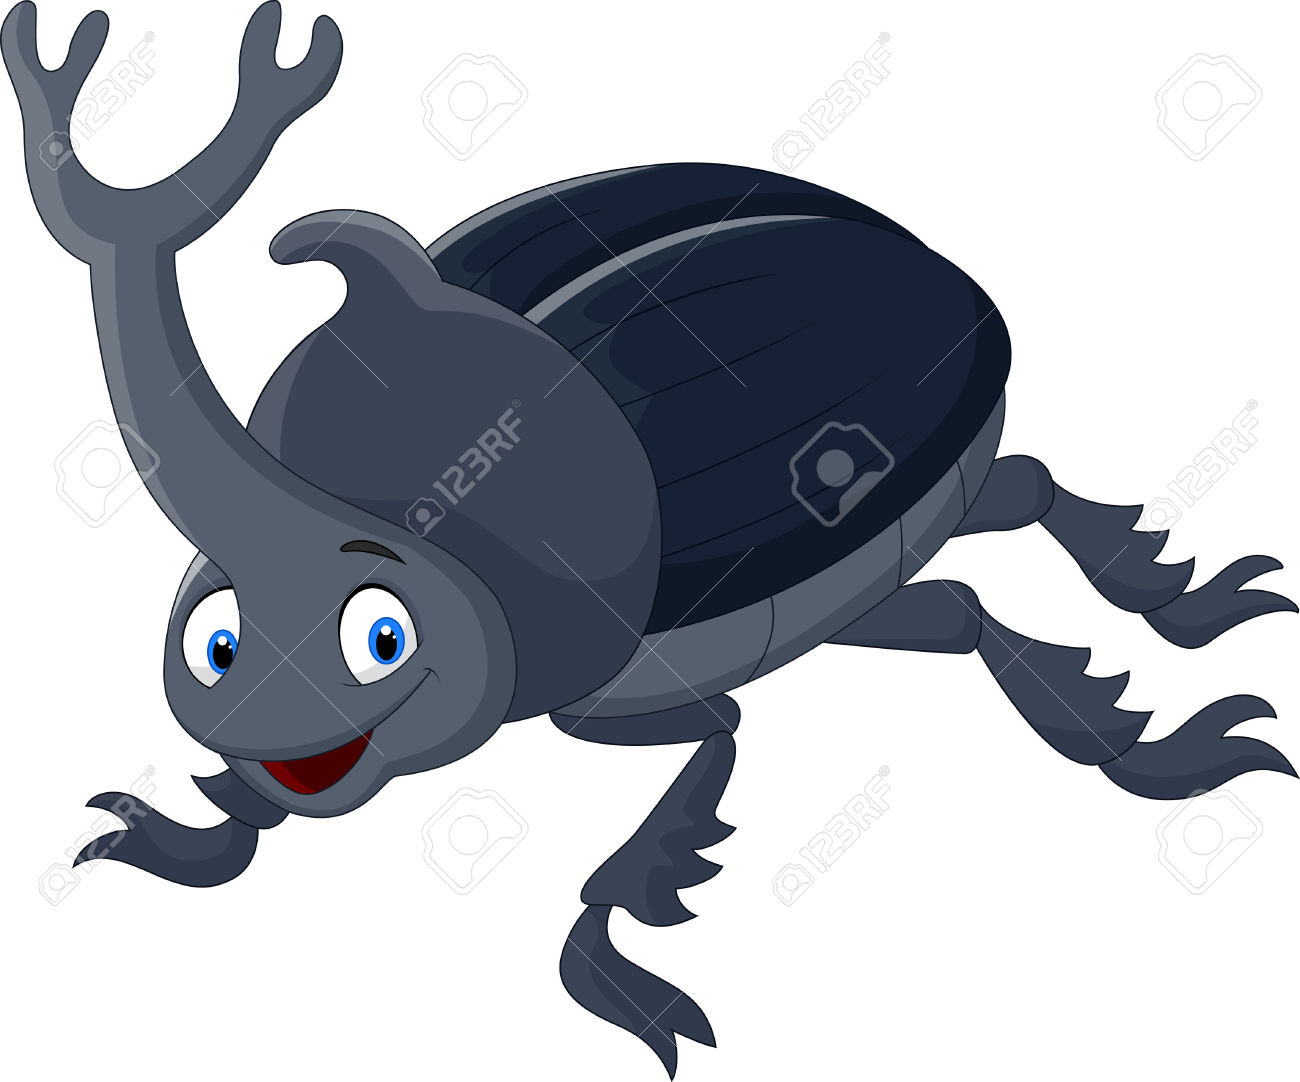 Stag Beetle clipart #6, Download drawings